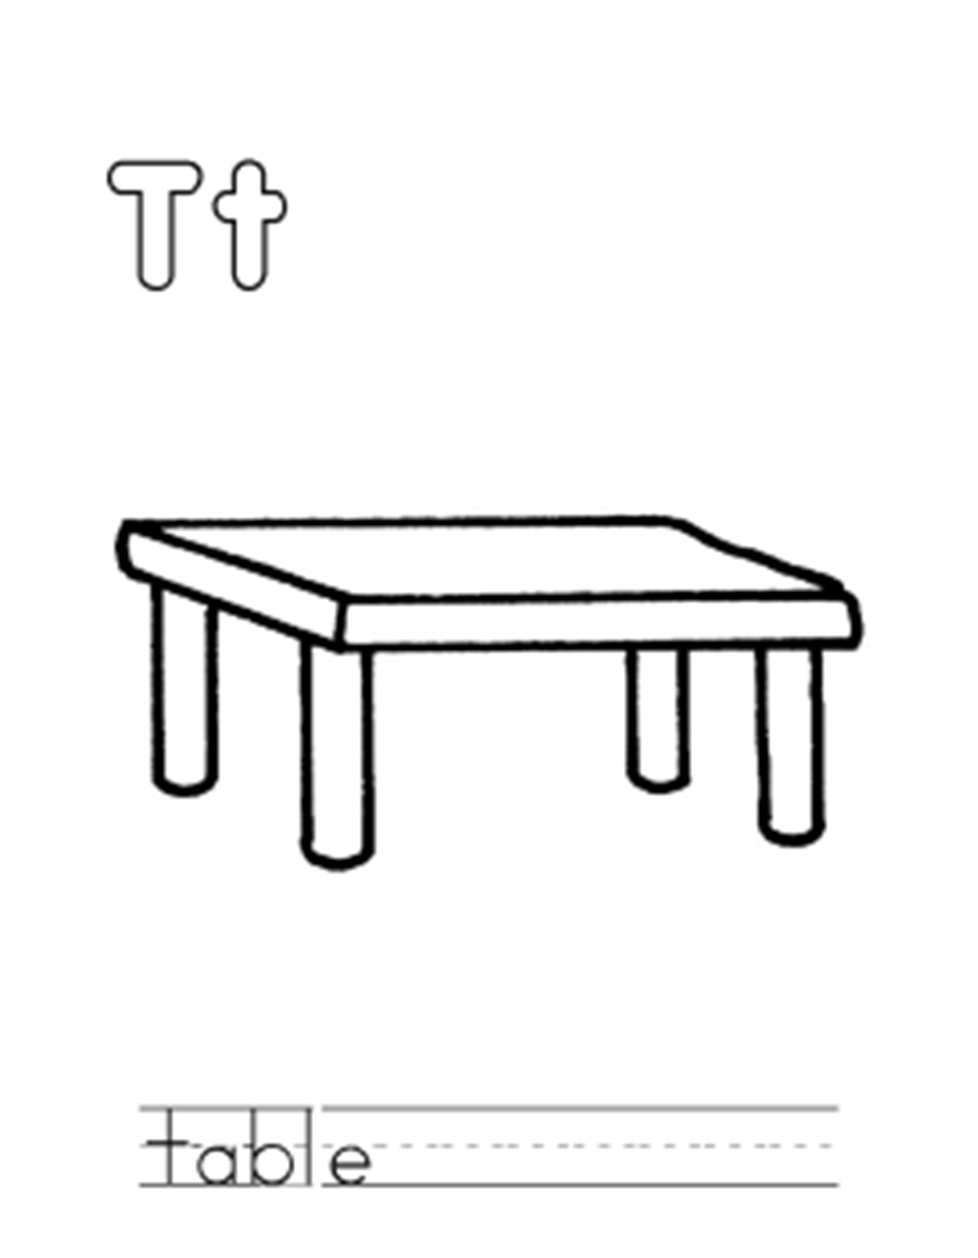 Table Alphabet Coloring Page | Alphabet Coloring pages of ...